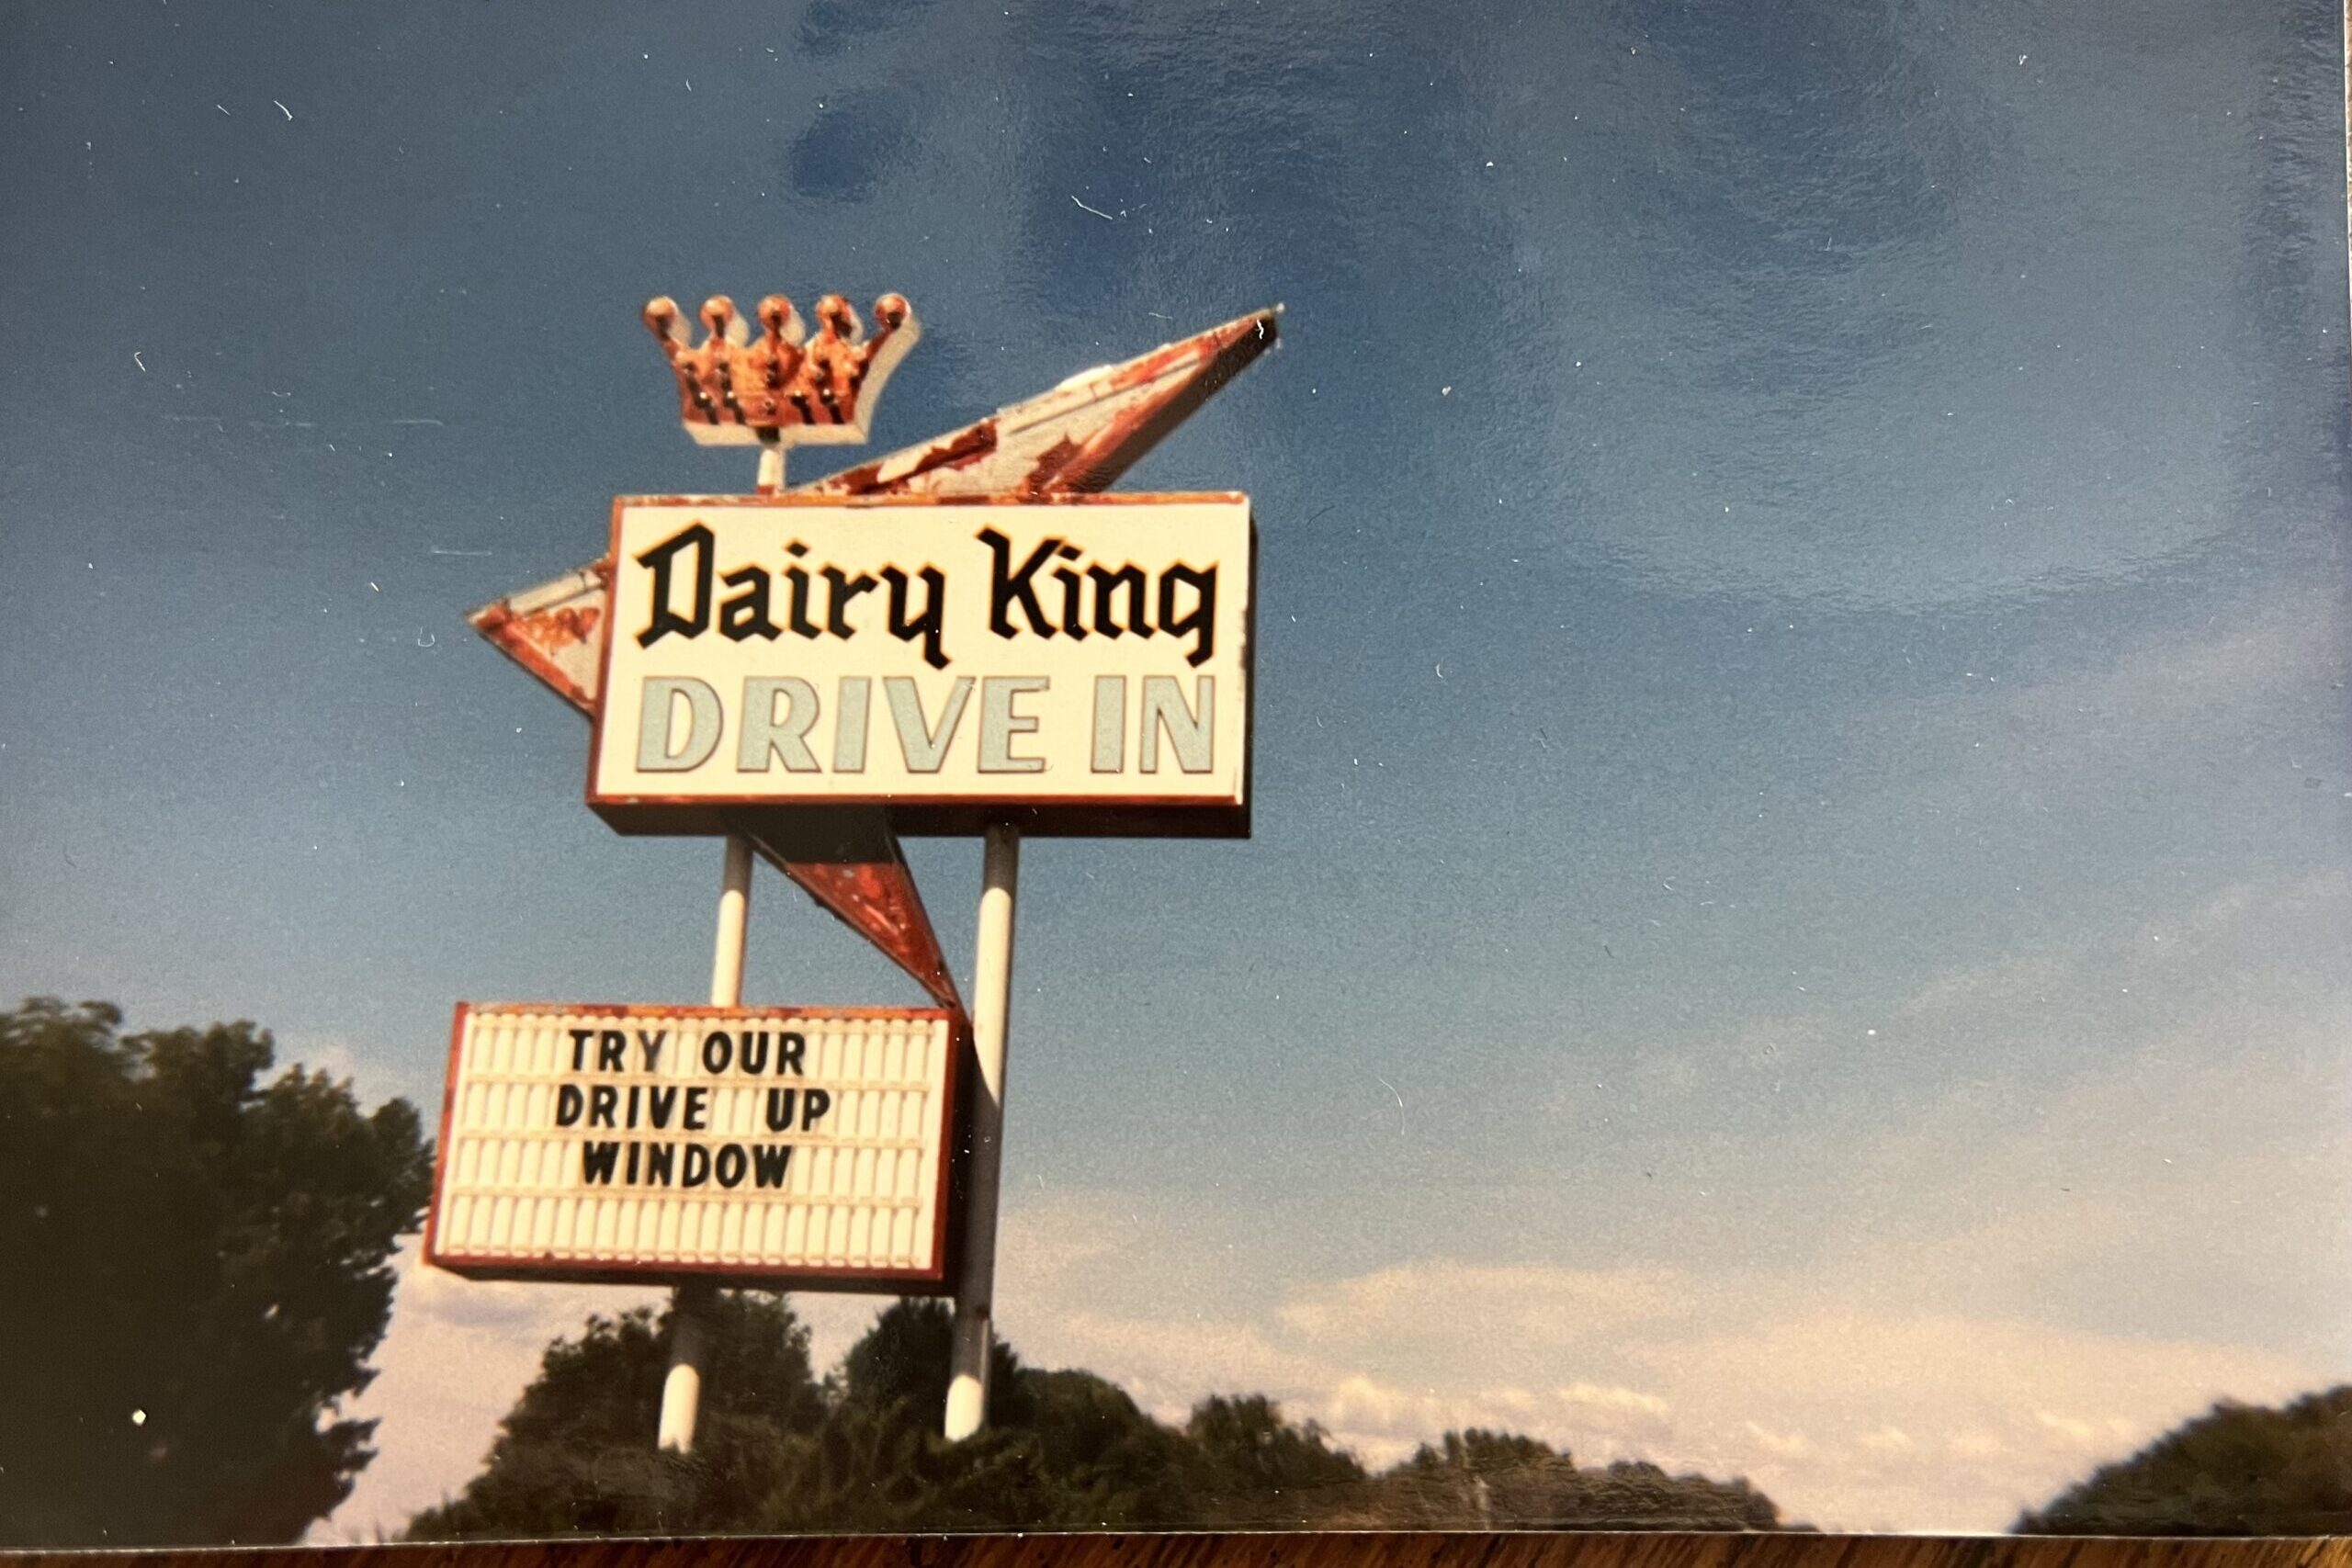 The old Dairy King sign.